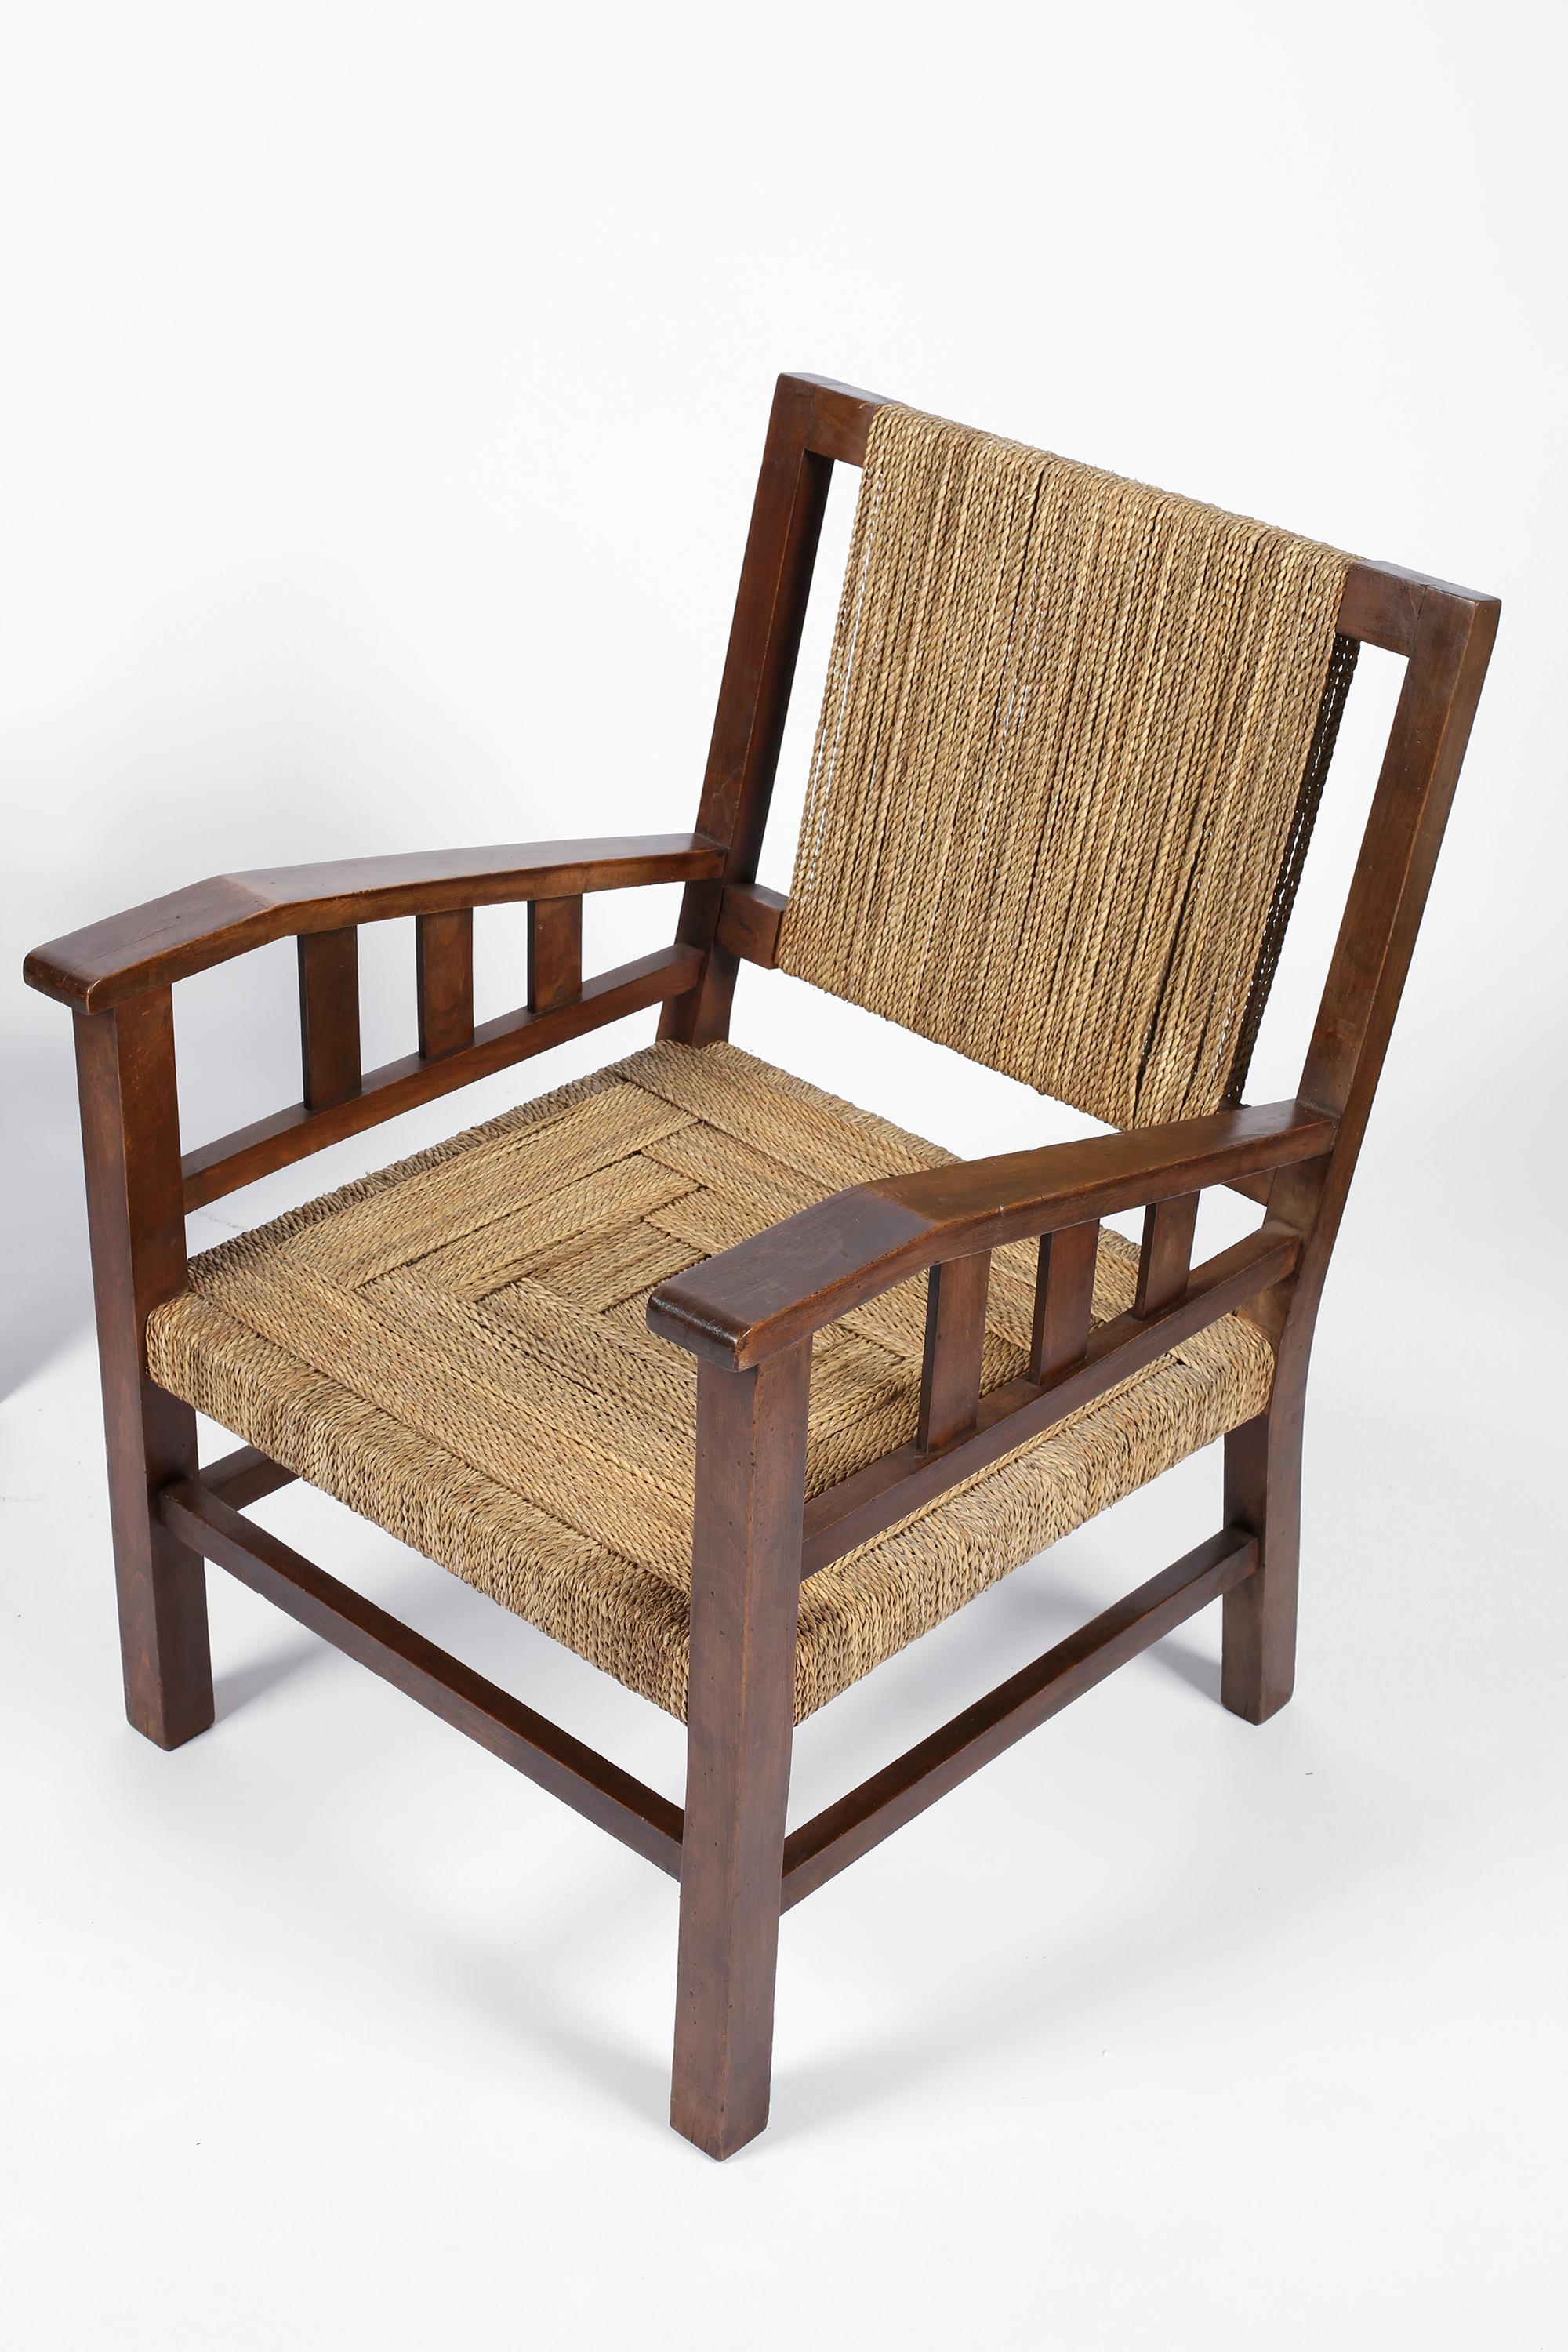 Pair of Francis Jourdain Armchairs in Beech and Seagrass, French, circa 1930s 1